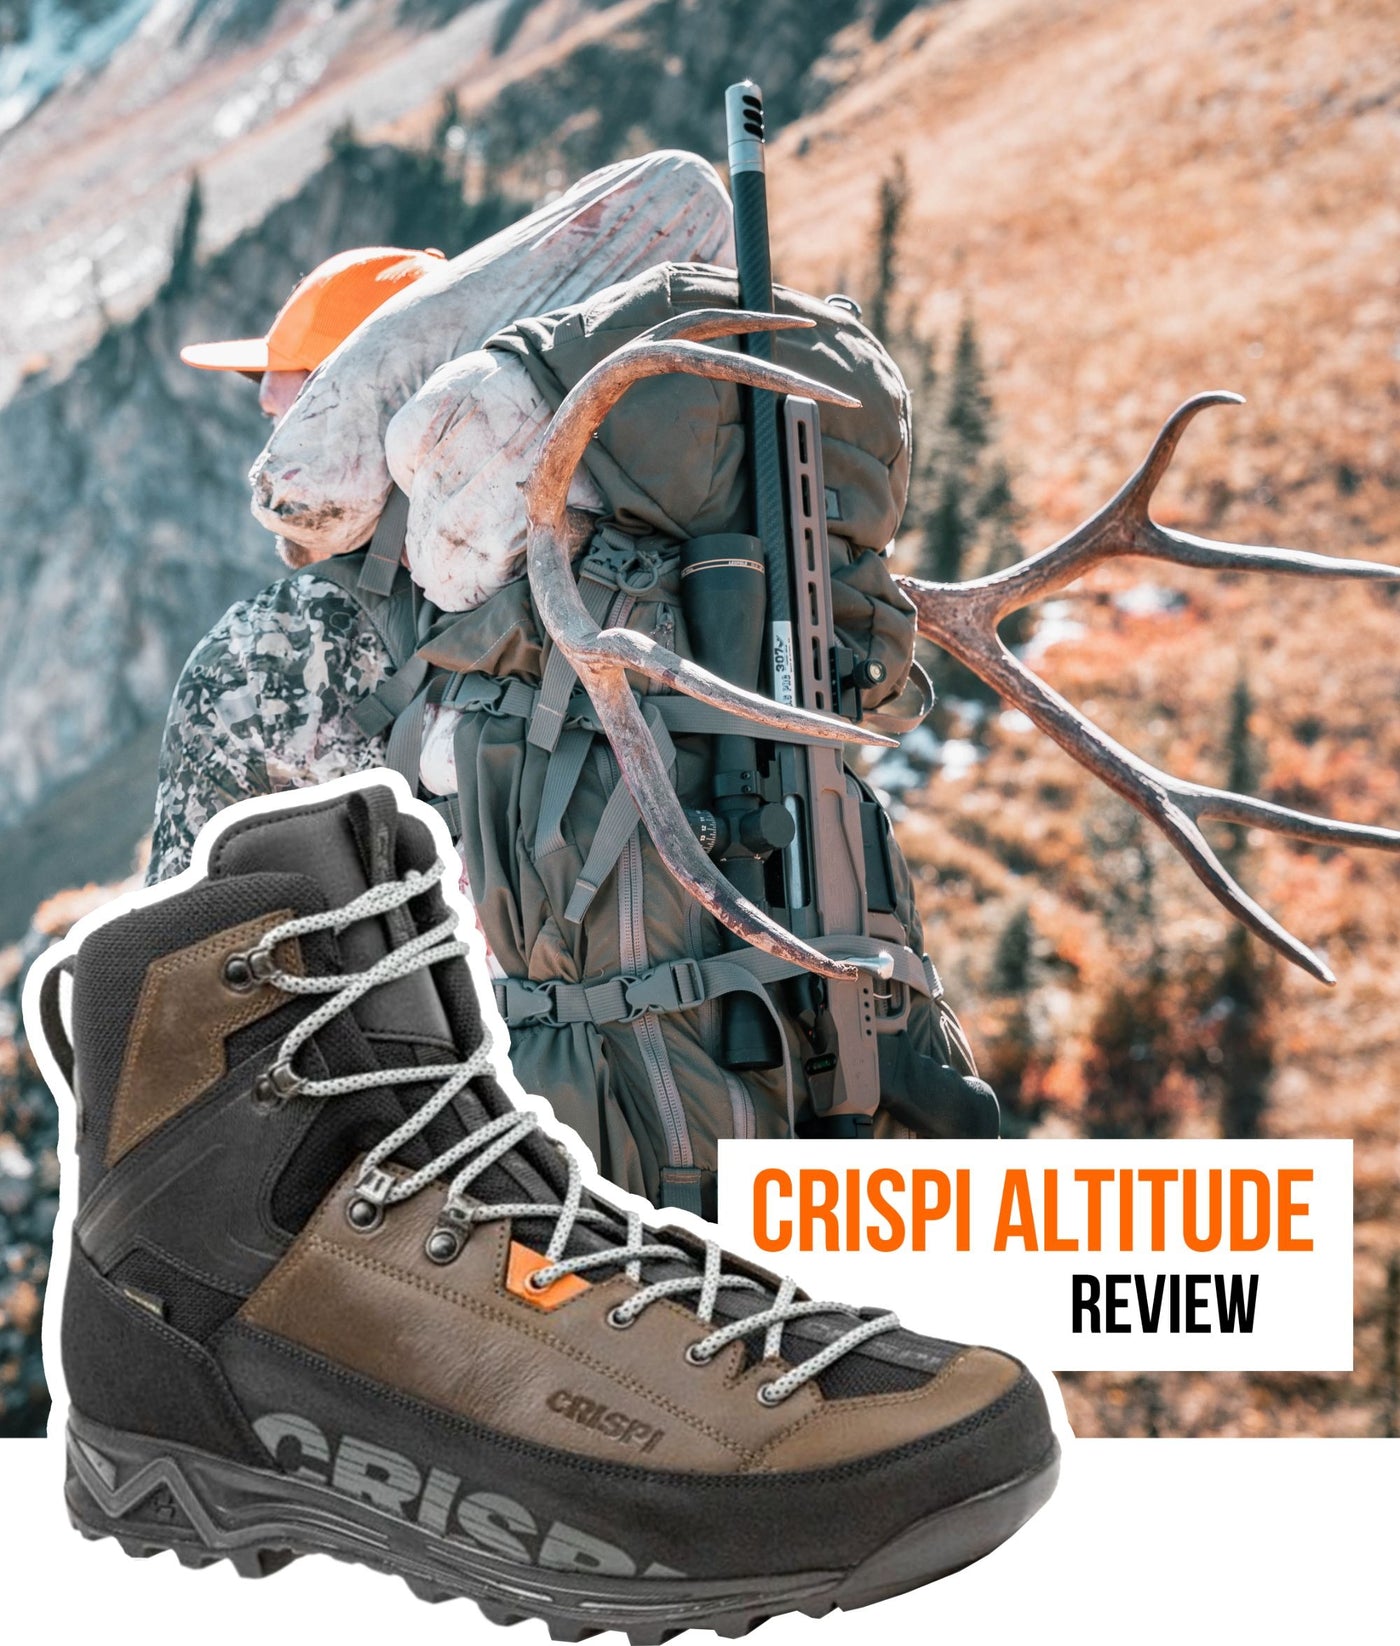 Crispi Altitude GTX Hunting Boot Review - My Thoughts after 1 season.